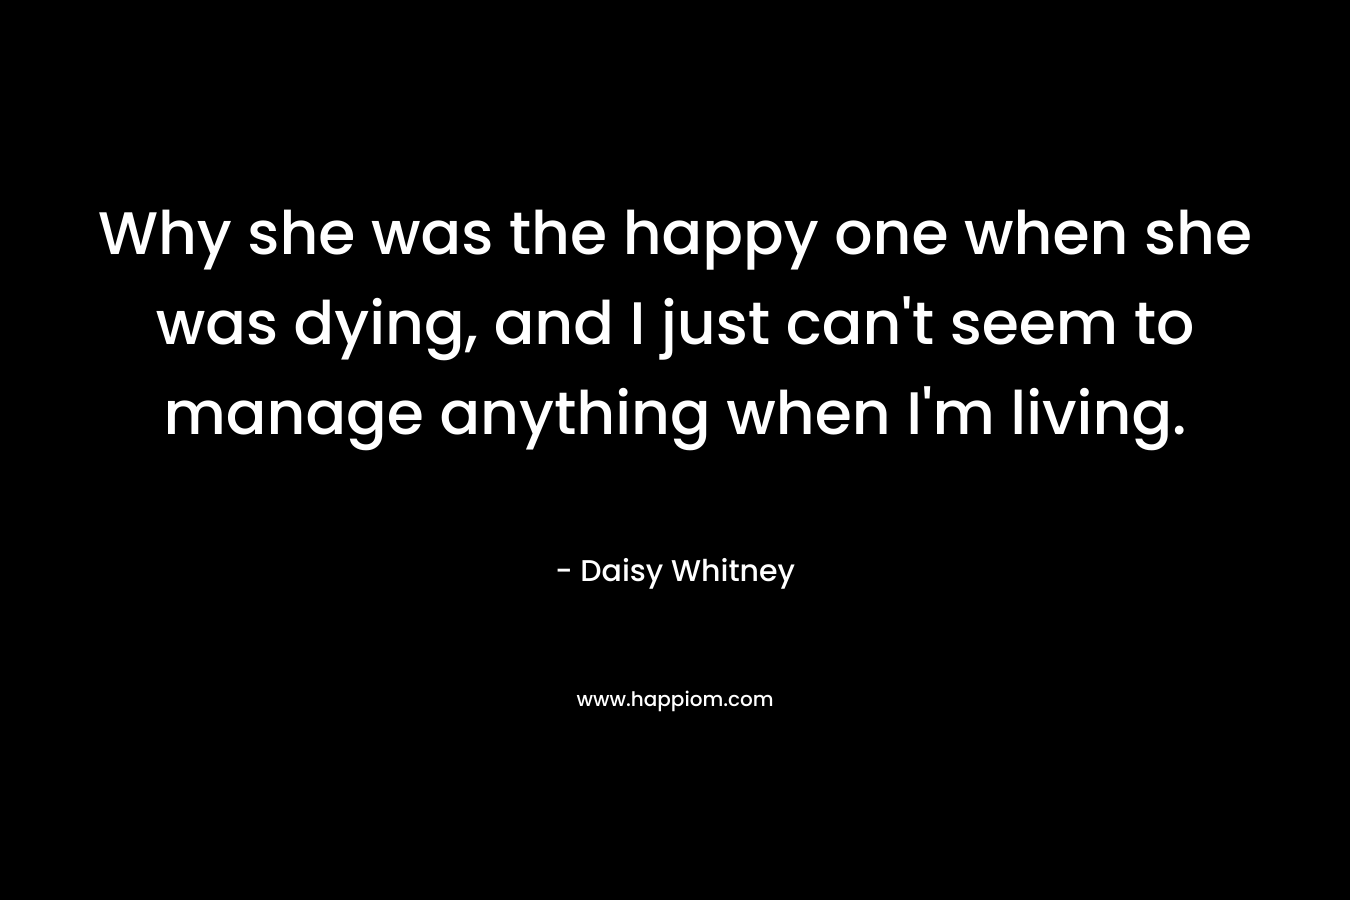 Why she was the happy one when she was dying, and I just can’t seem to manage anything when I’m living. – Daisy Whitney